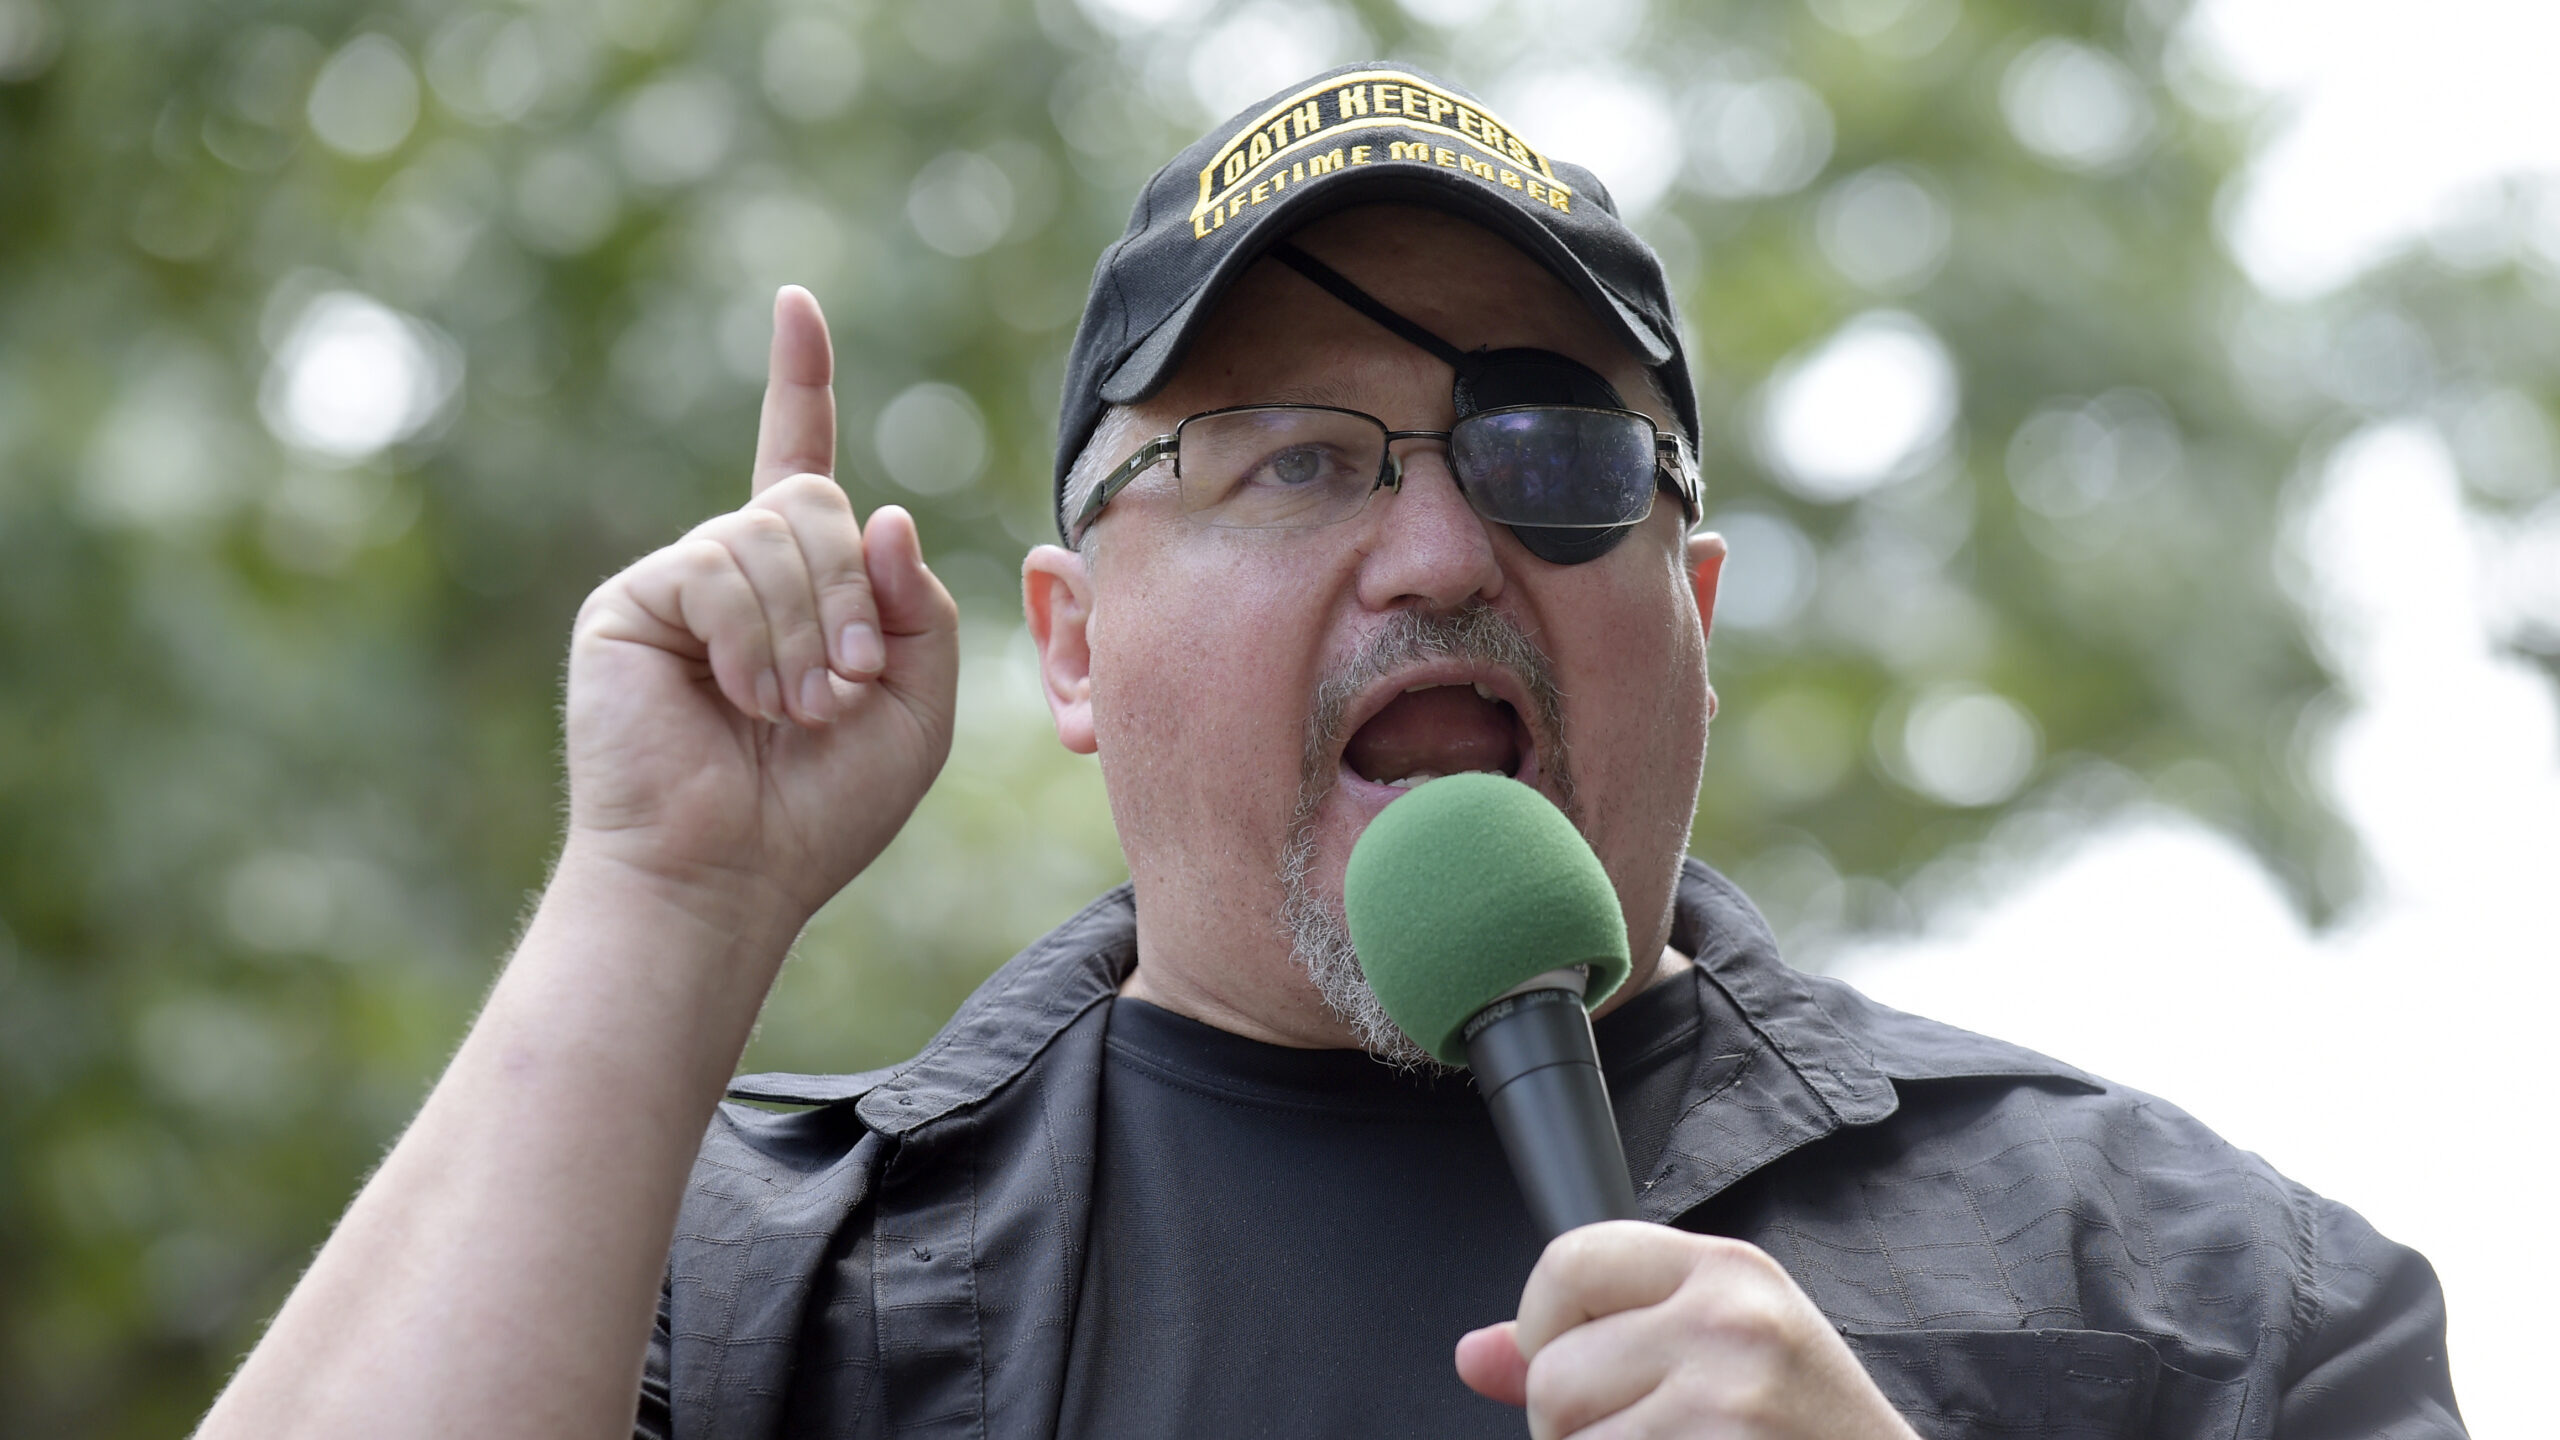 oath keepers founder stewart rhodes pictured...